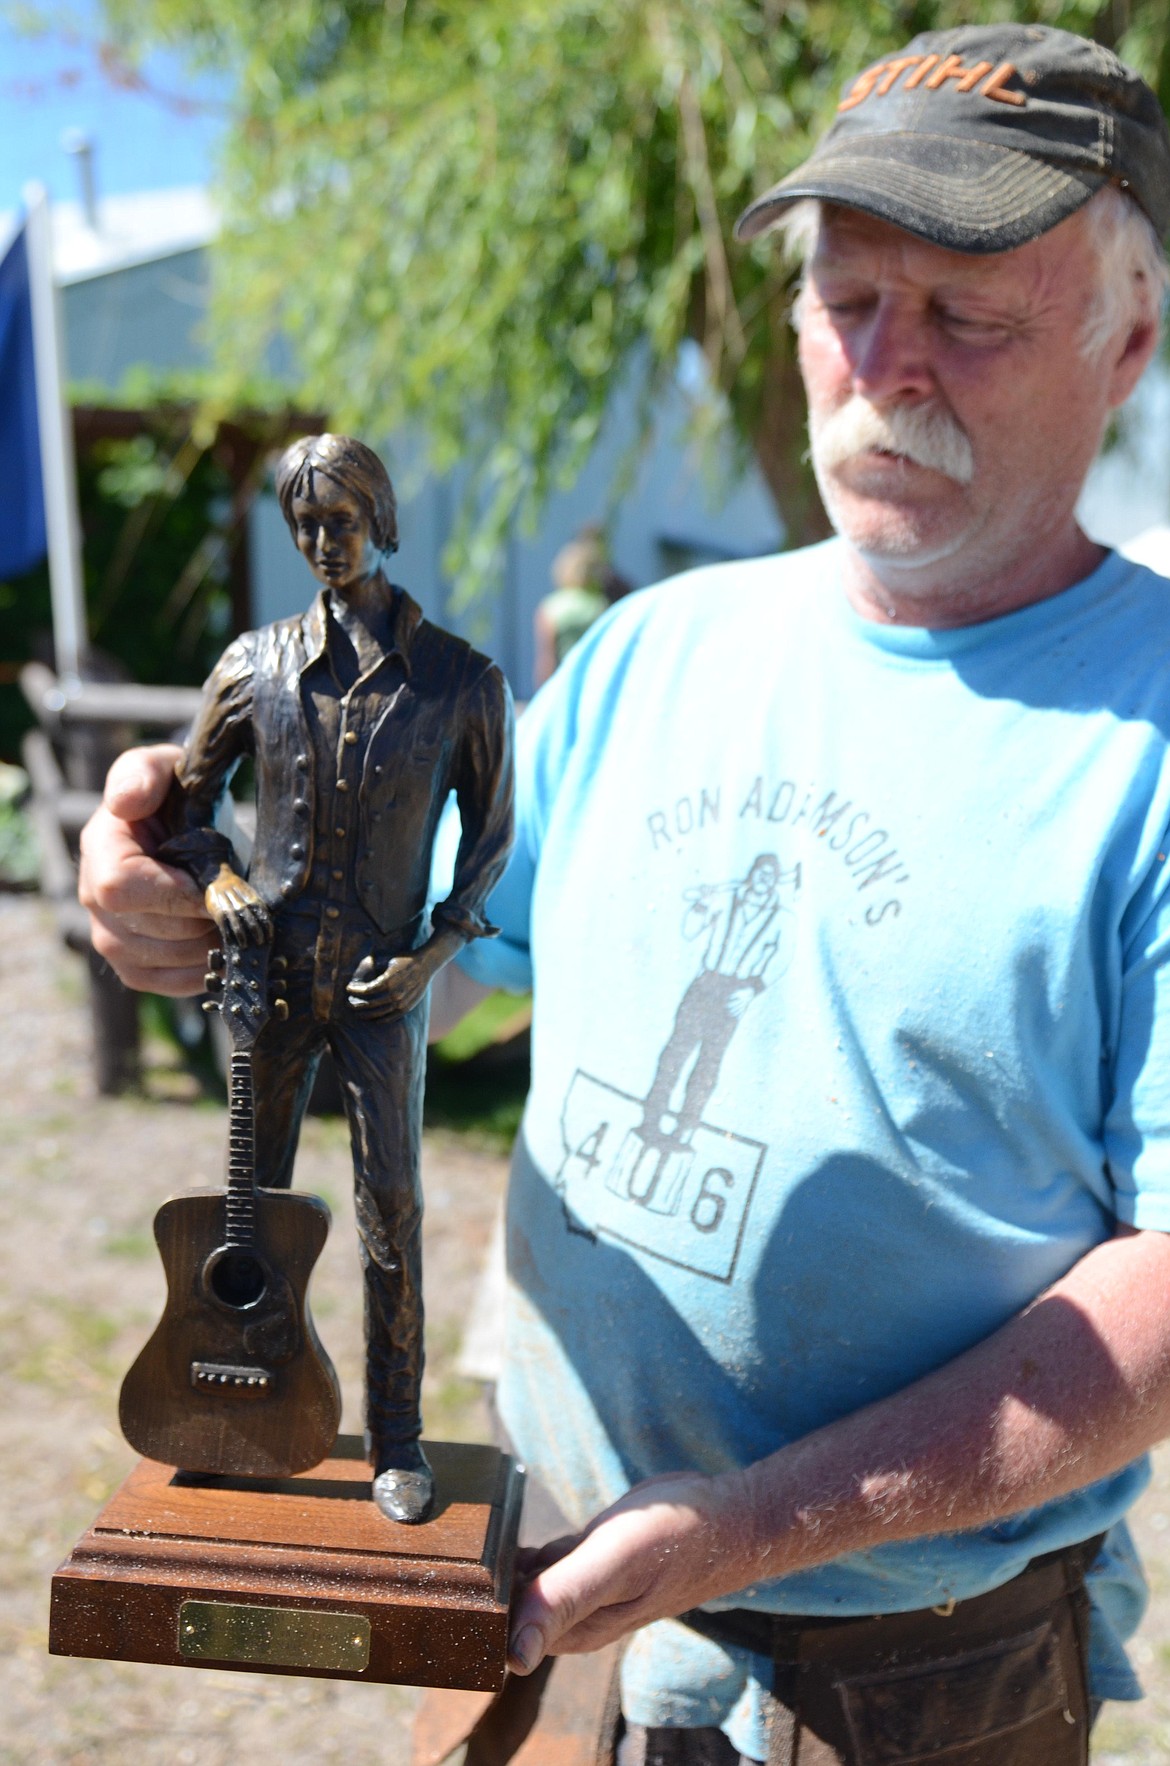 Ron Adamson of Libby, who took third in this year's Chainsaw Rendezvous, displays a small replica of his famous "Standin' on the Corner" sculpture in Winslow, Ariz. The original was created in 1999 to capture the feel of the Eagles song "Take it Easy." Millions of people veer off of I-40 onto Route 66 through Winslow to have their picture taken with the statue. Coincidentally, years after the statue was created, Adamson found a photo of his grandfather as a youth, standing on Route 66 with his guitar on his toe, almost exactly like the statue. (Carolyn Hidy/Lake County Leader)